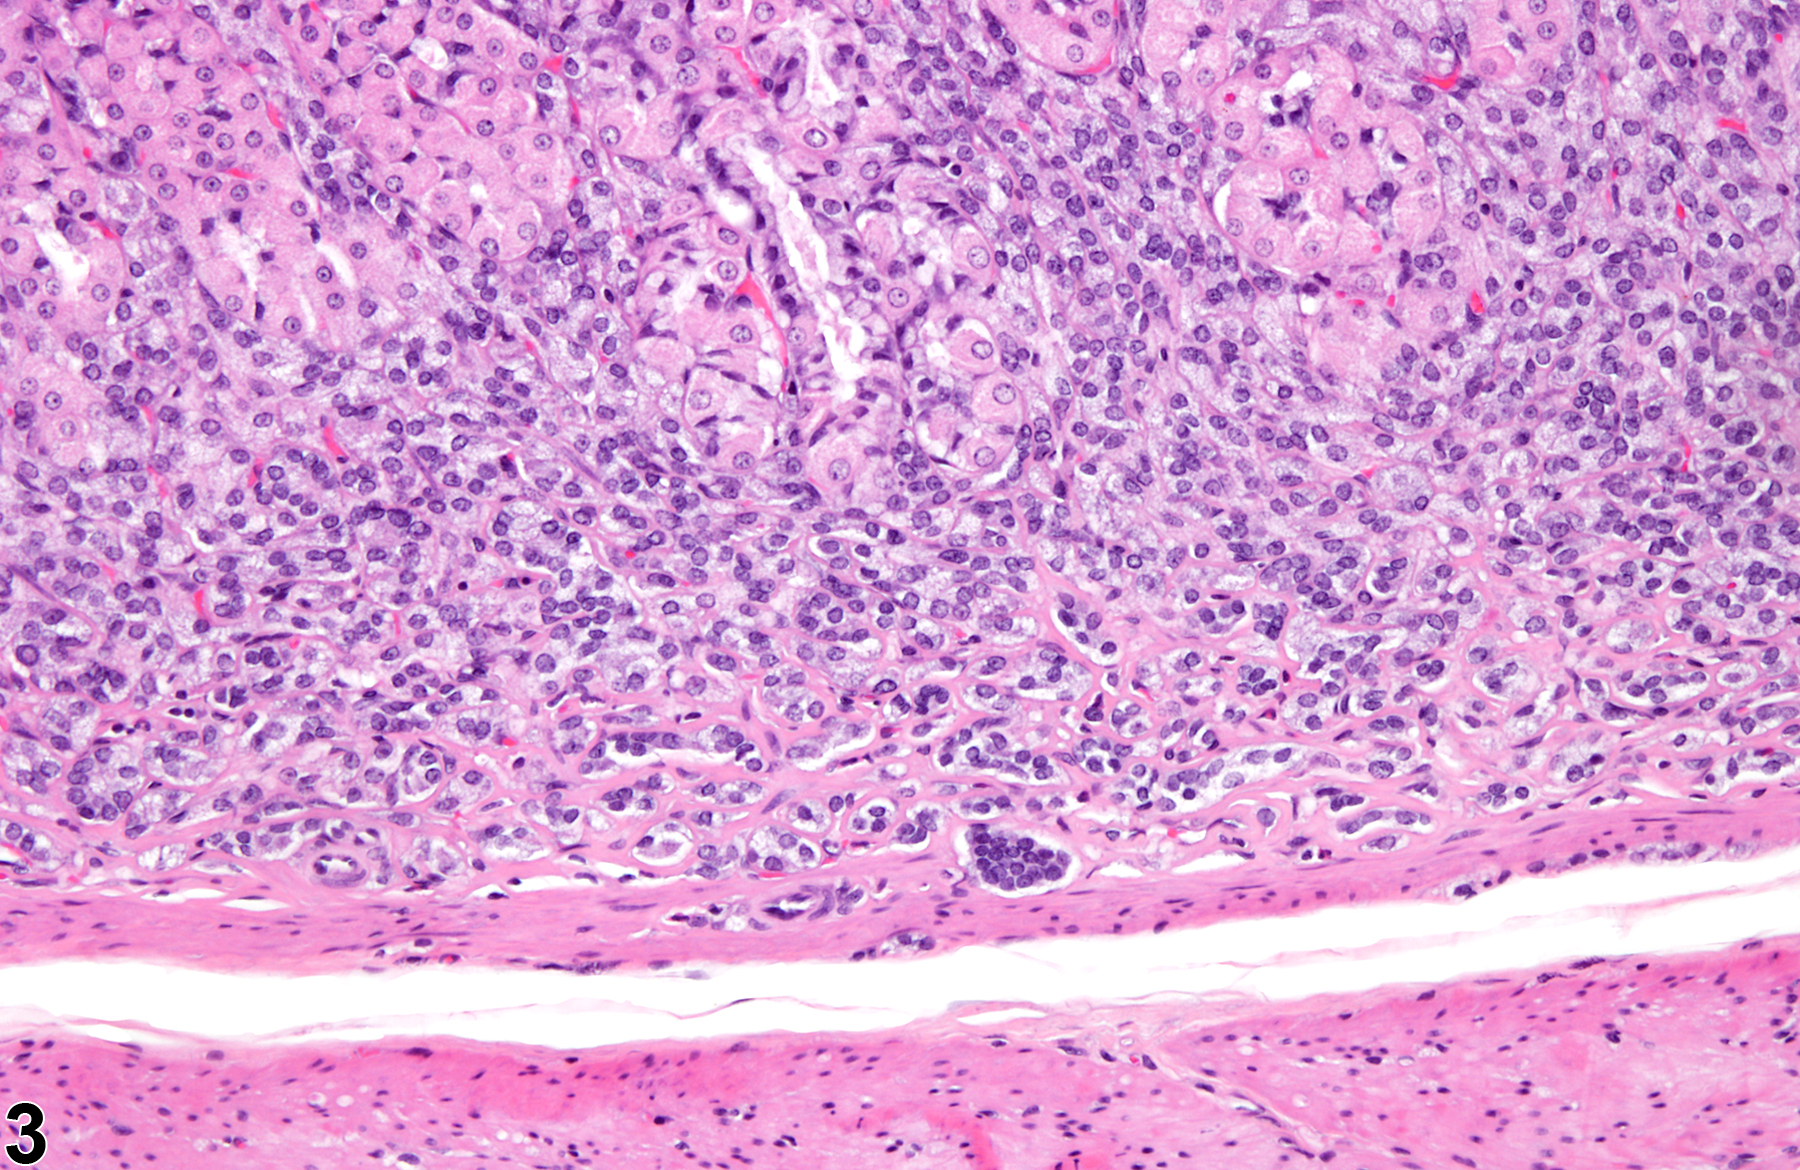 Image of hyperplasia in the glandular stomach neuroendocrine cell from a female F344/N rat in a chronic study